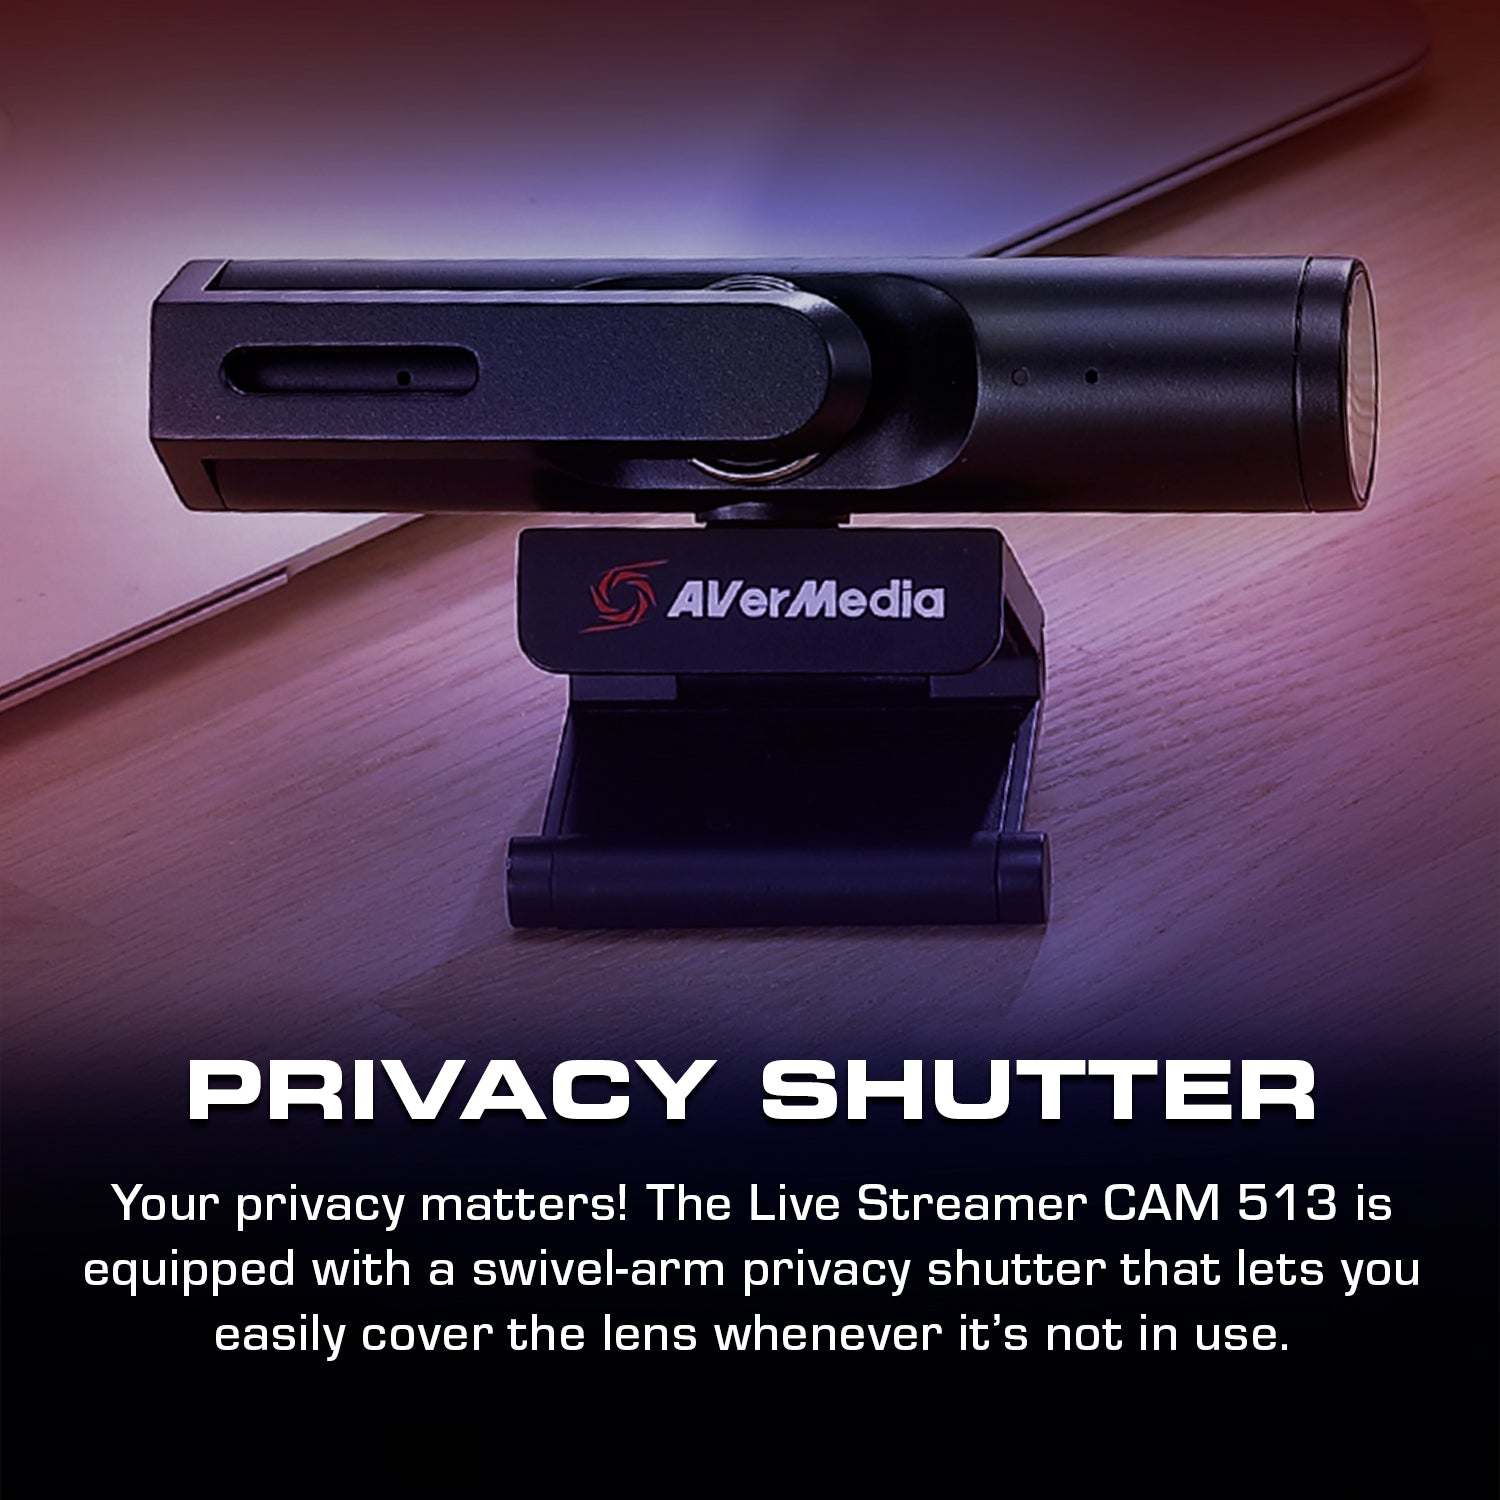 4K Webcam comes with privacy shutter